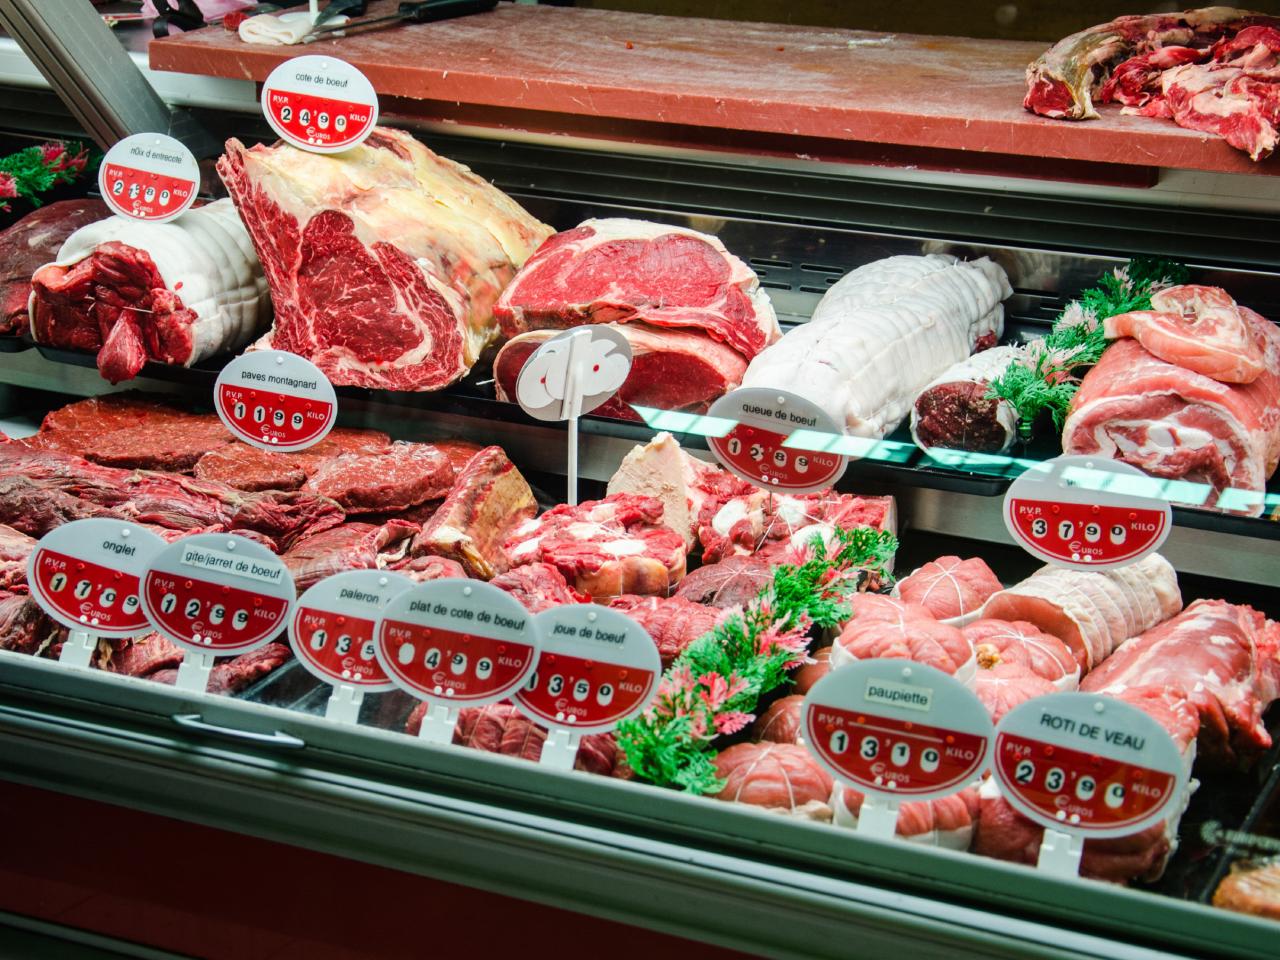 The Fresh vs Frozen Debate - What's The Best For Your Meat? – Meat